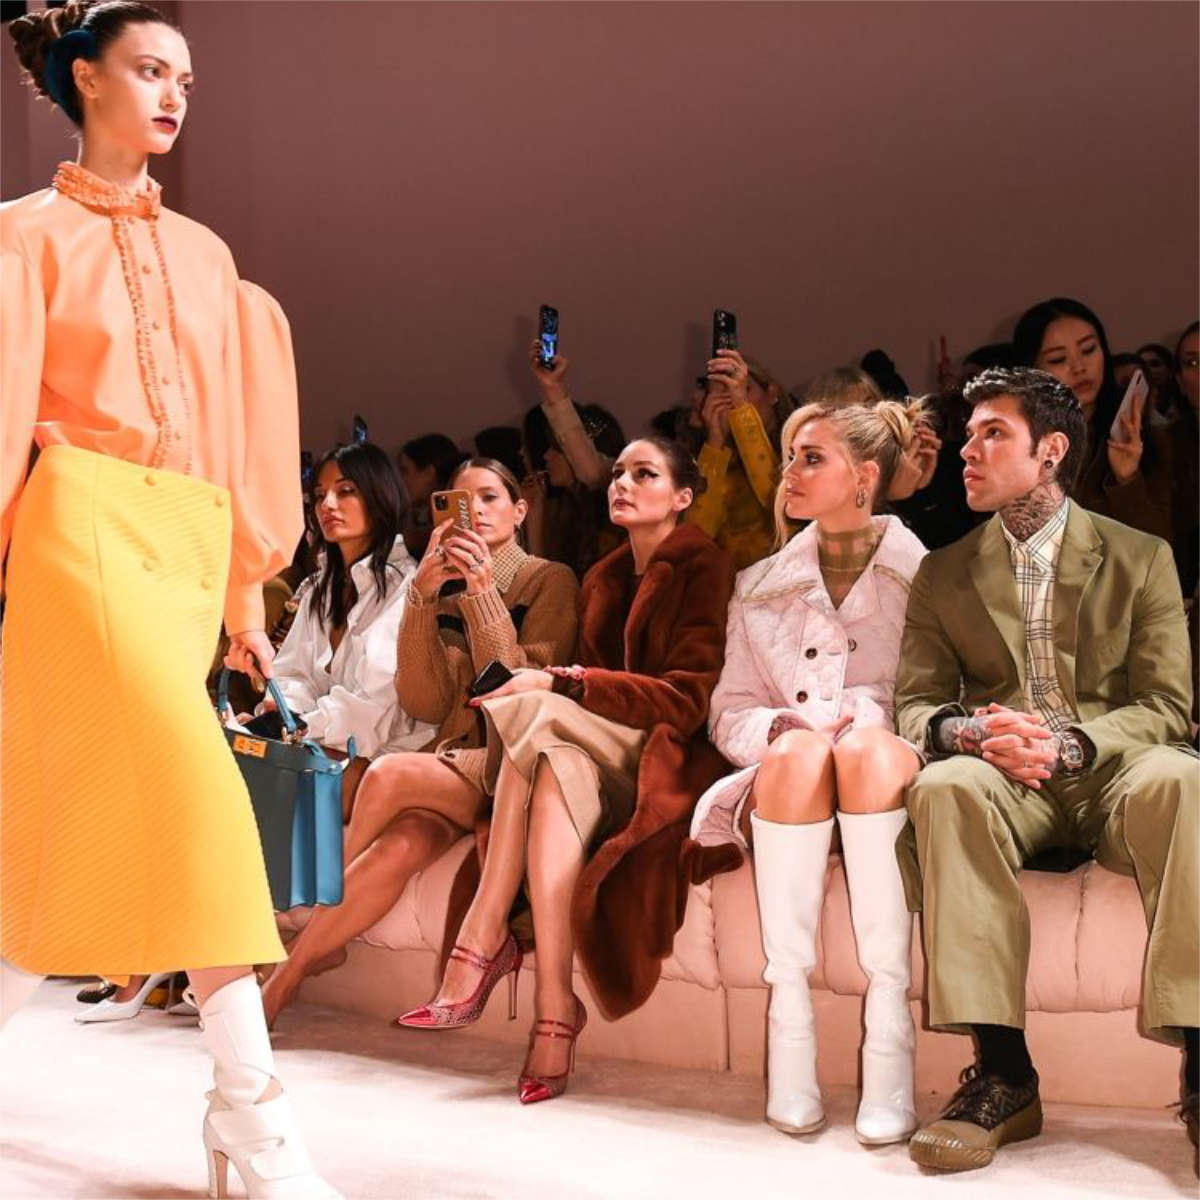 The FENDI Women’s Fall/Winter 2020-2021 Collection